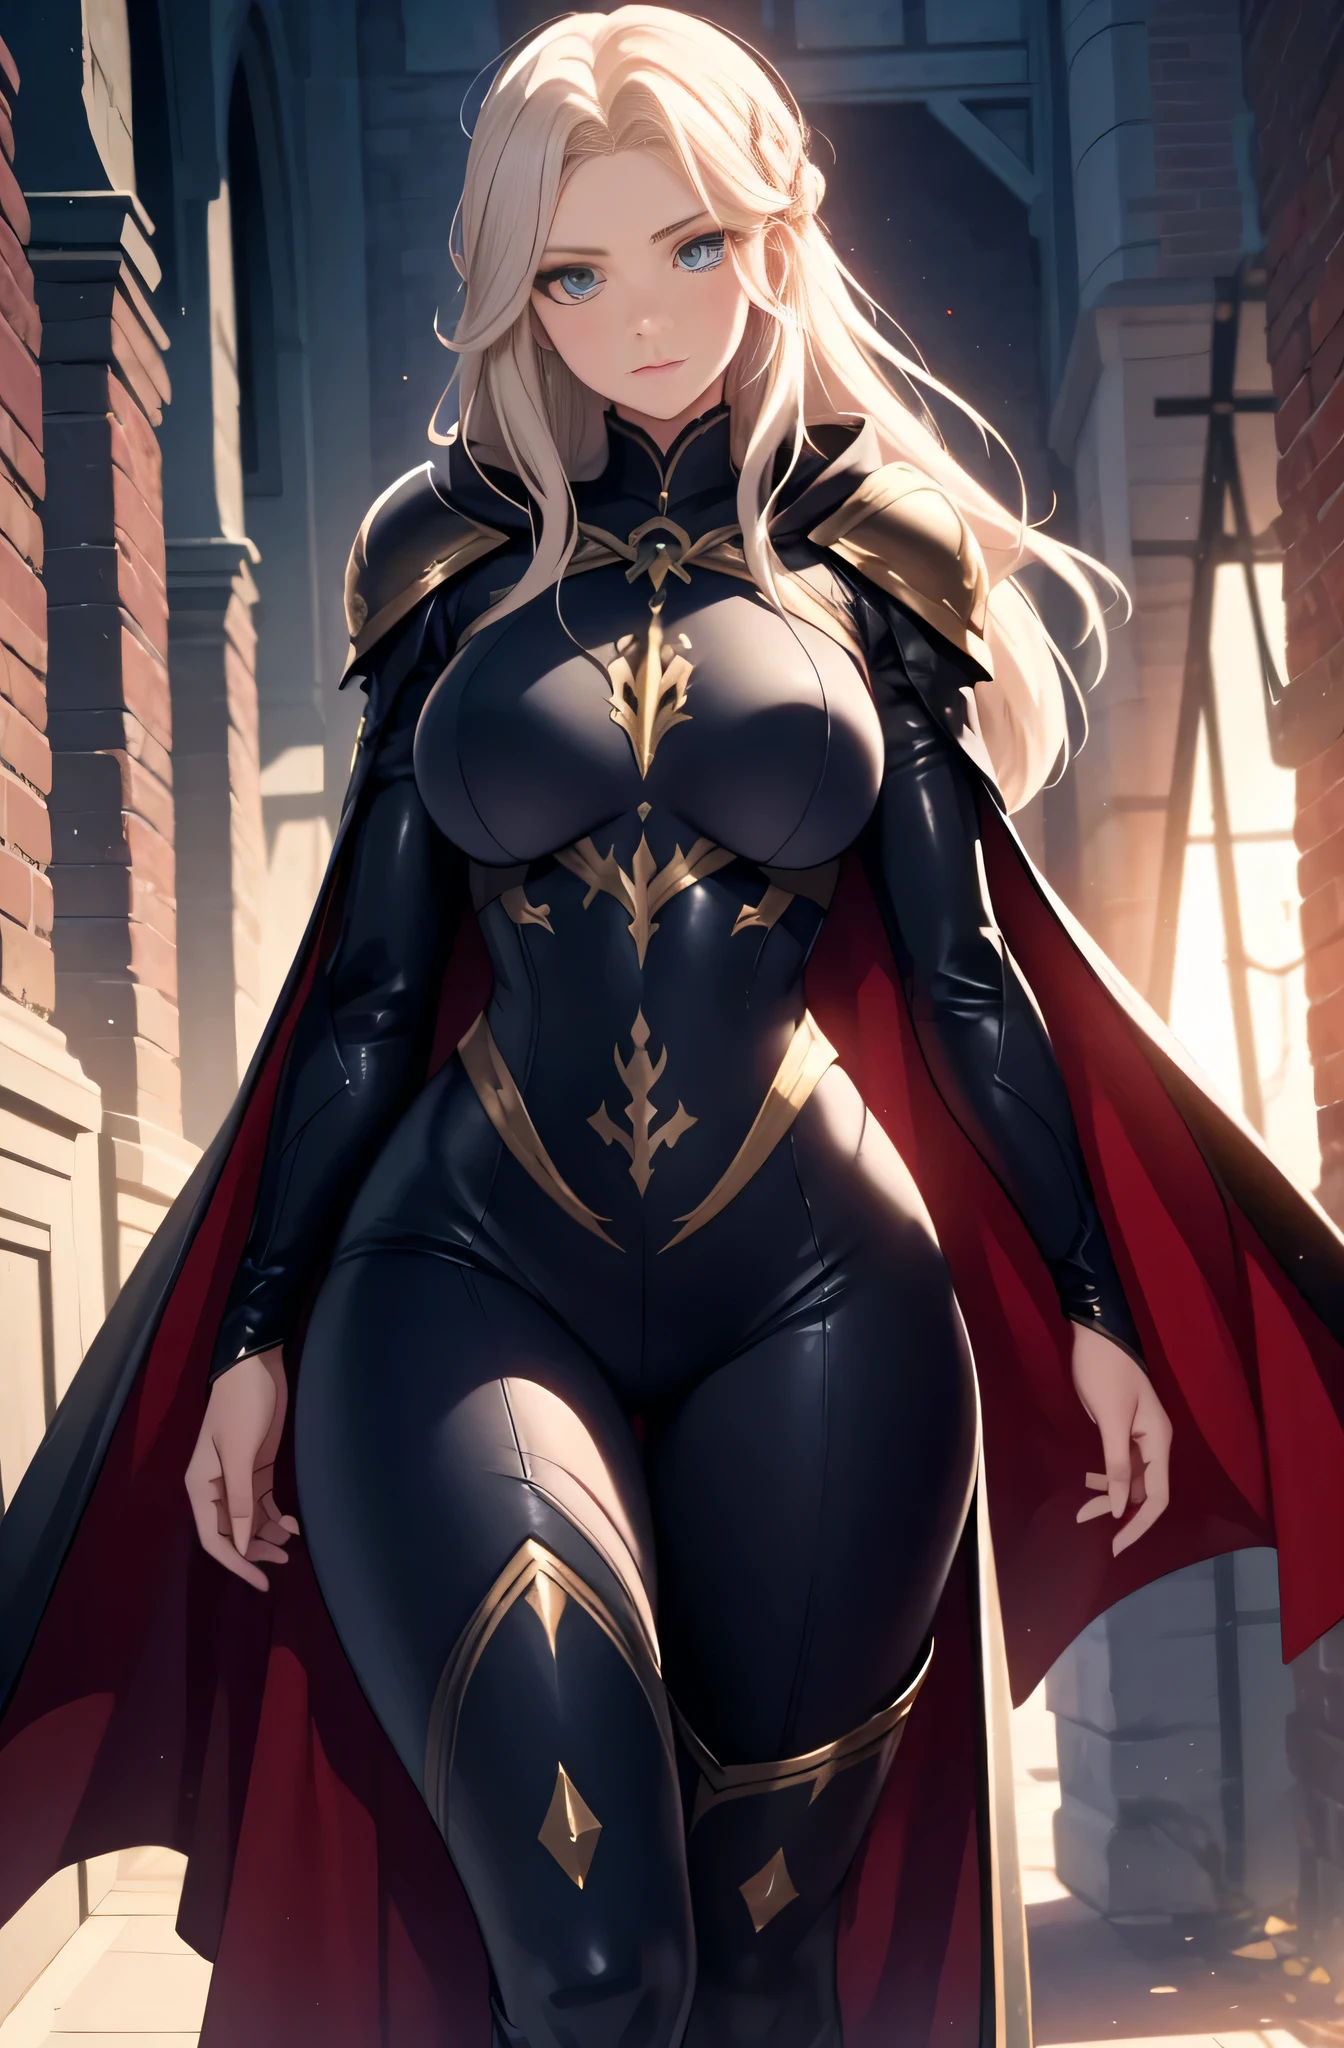 high priestess，Robe，mature woman, female，voluptuous figure，tightsuit，blonde hair, Female, alone, paladin of light, human, light powers, expert fighter, detailed eyes, beautifull face, long hair, defined body, yellow and bright eyes, thick legs, strong legs, tall, Voluptuous legs, black armor, female paladin, huge ass, big hip, big ass, wearing black coat, black and red robes, detailed eyes, big hips, medium armor, tall girl,